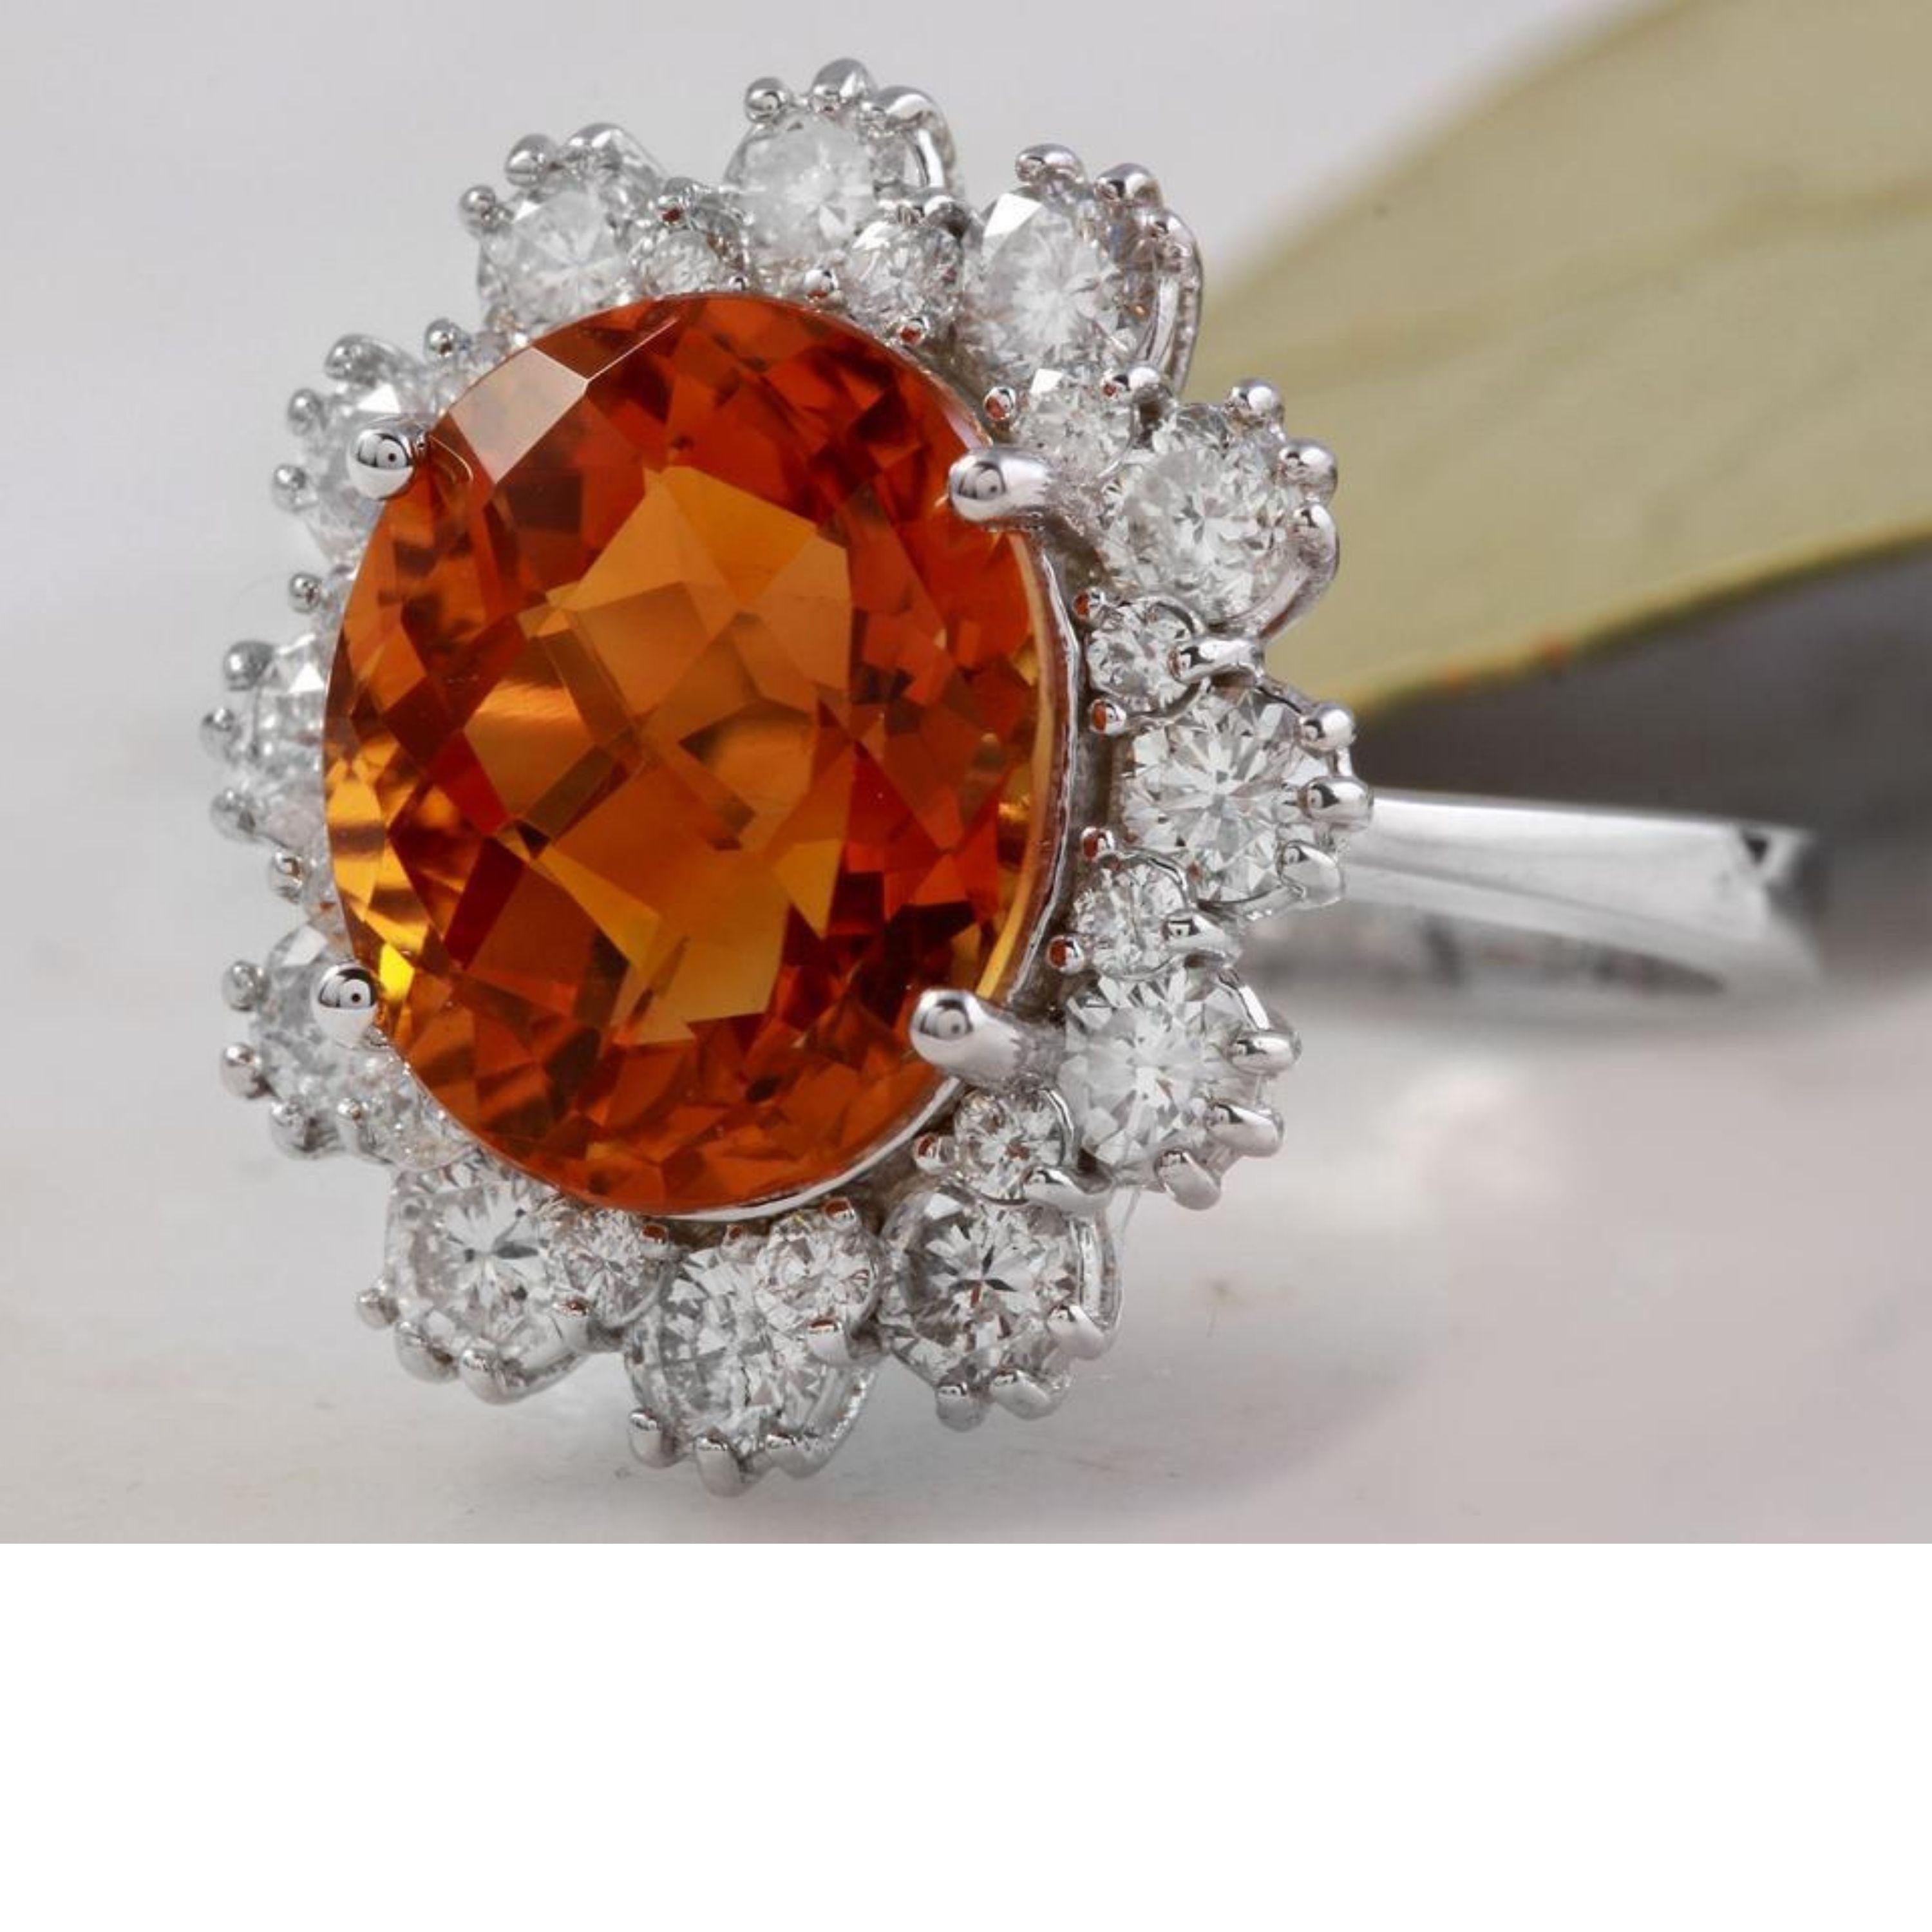 5.90 Carats Exquisite Natural Madeira Citrine and Diamond 14K Solid White Gold Ring

Total Natural Citrine Weights: 4.60 Carats

Citrine Measures: 12 x 10mm

Natural Round Diamonds Weight: 1.30 Carats (color G-H / Clarity Si1-SI2)

Ring size: 7 (we